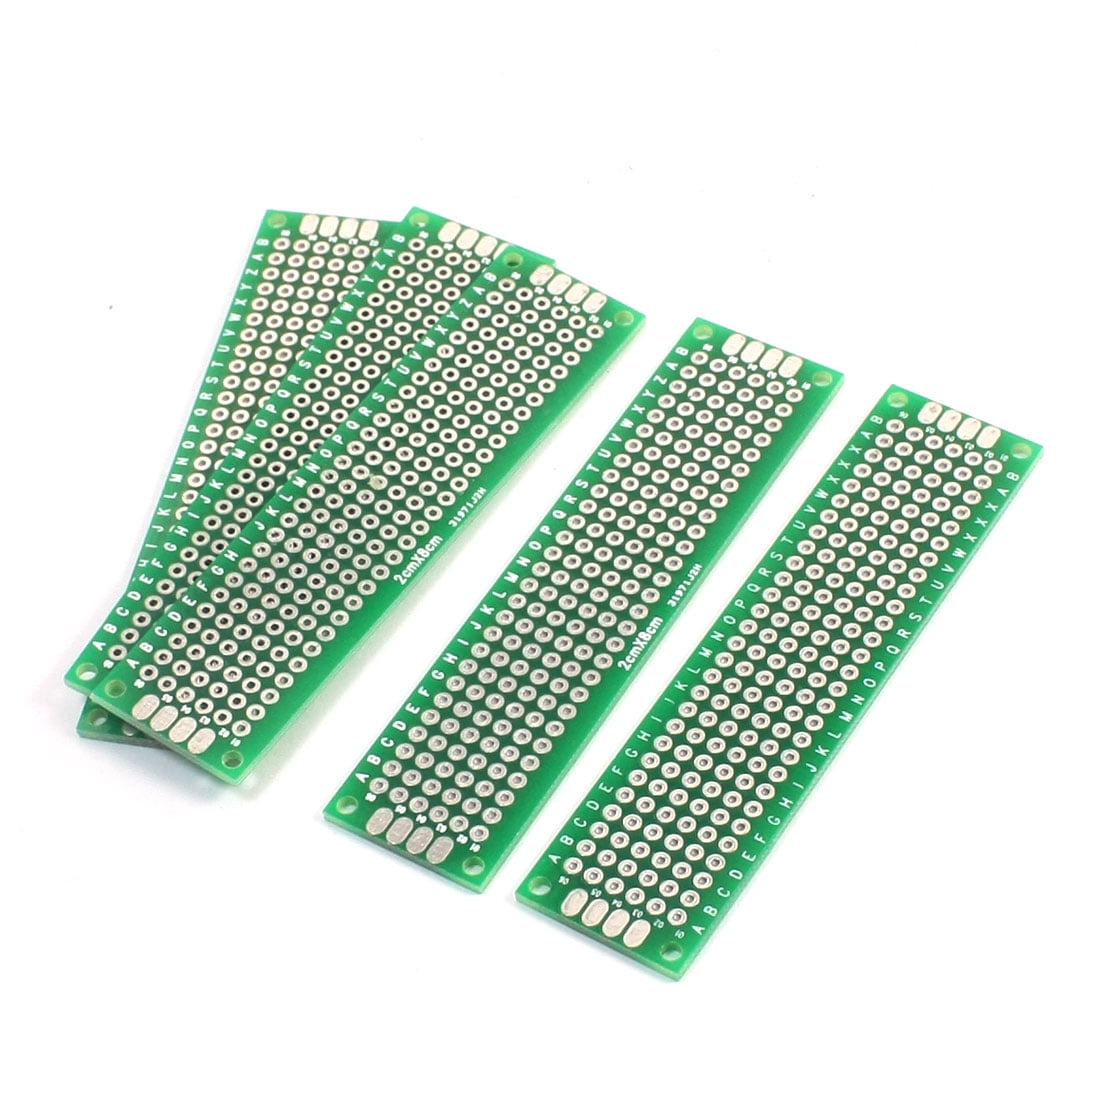 5 pc Double Sided Protoboard Prototyping PCB Board 8cm x 12cm 